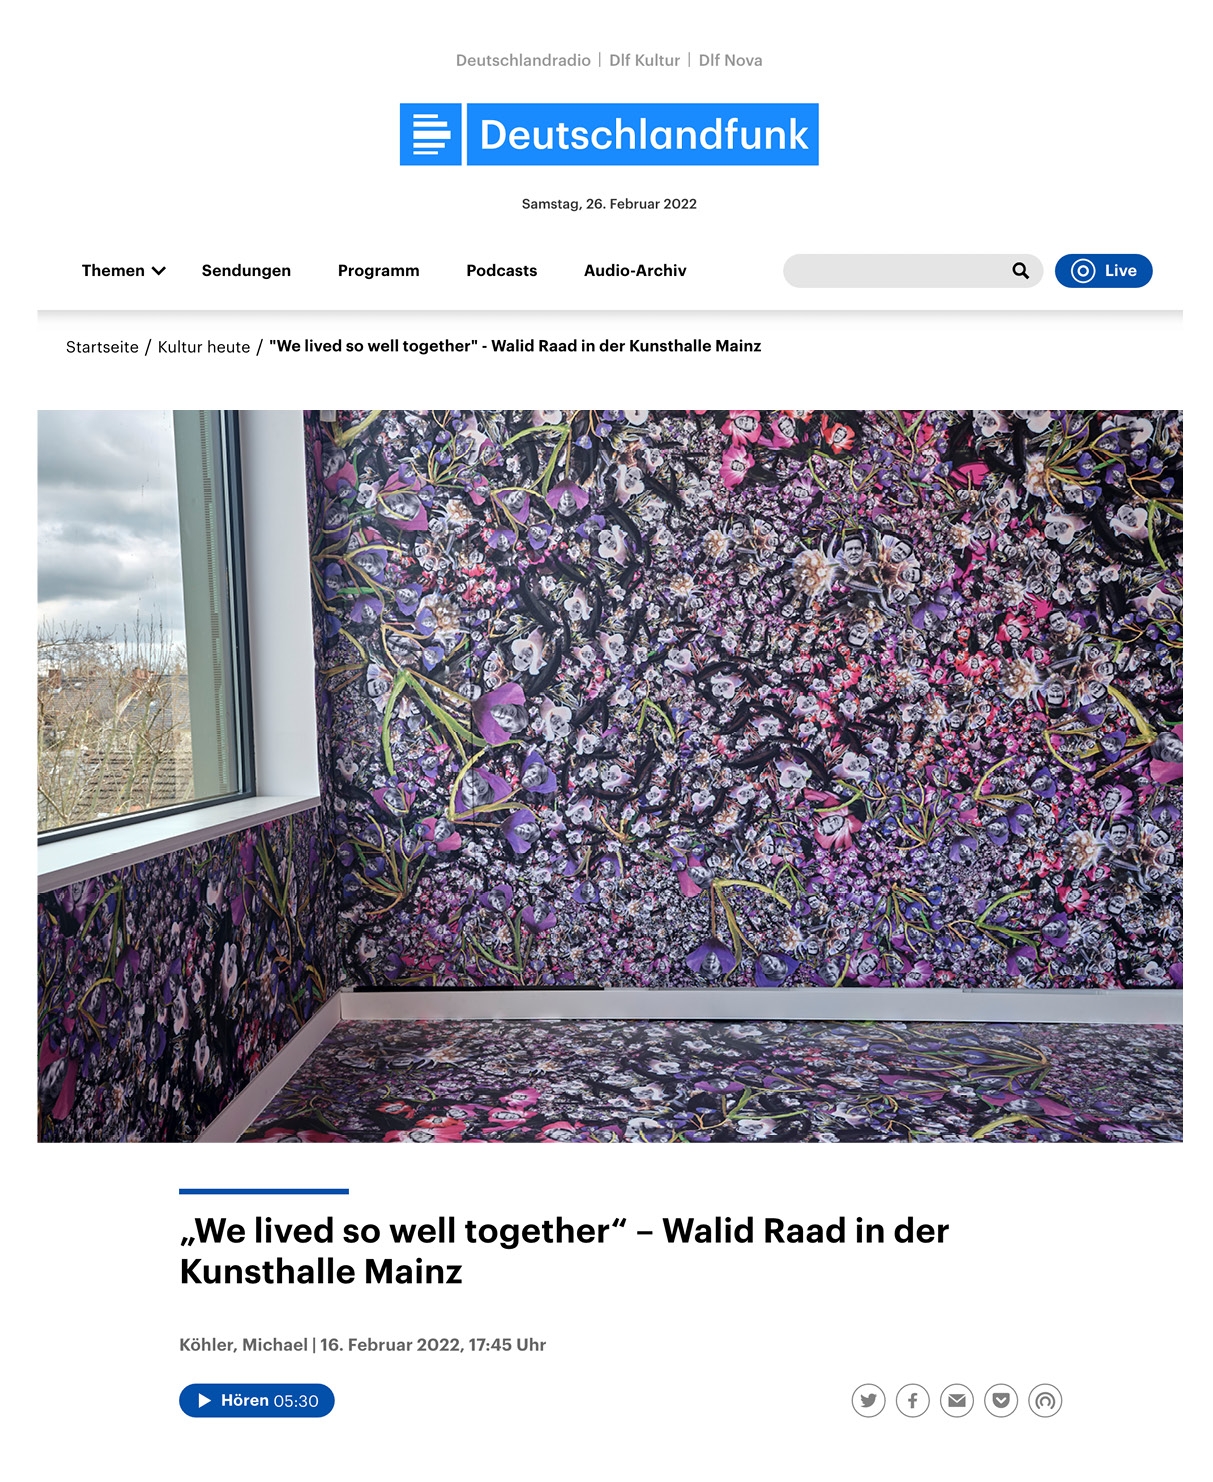 Walid Raad: "We lived so well together" at Kunsthalle Mainz | Deutschlandfunk, Michael Köhler, February 16th, 2022